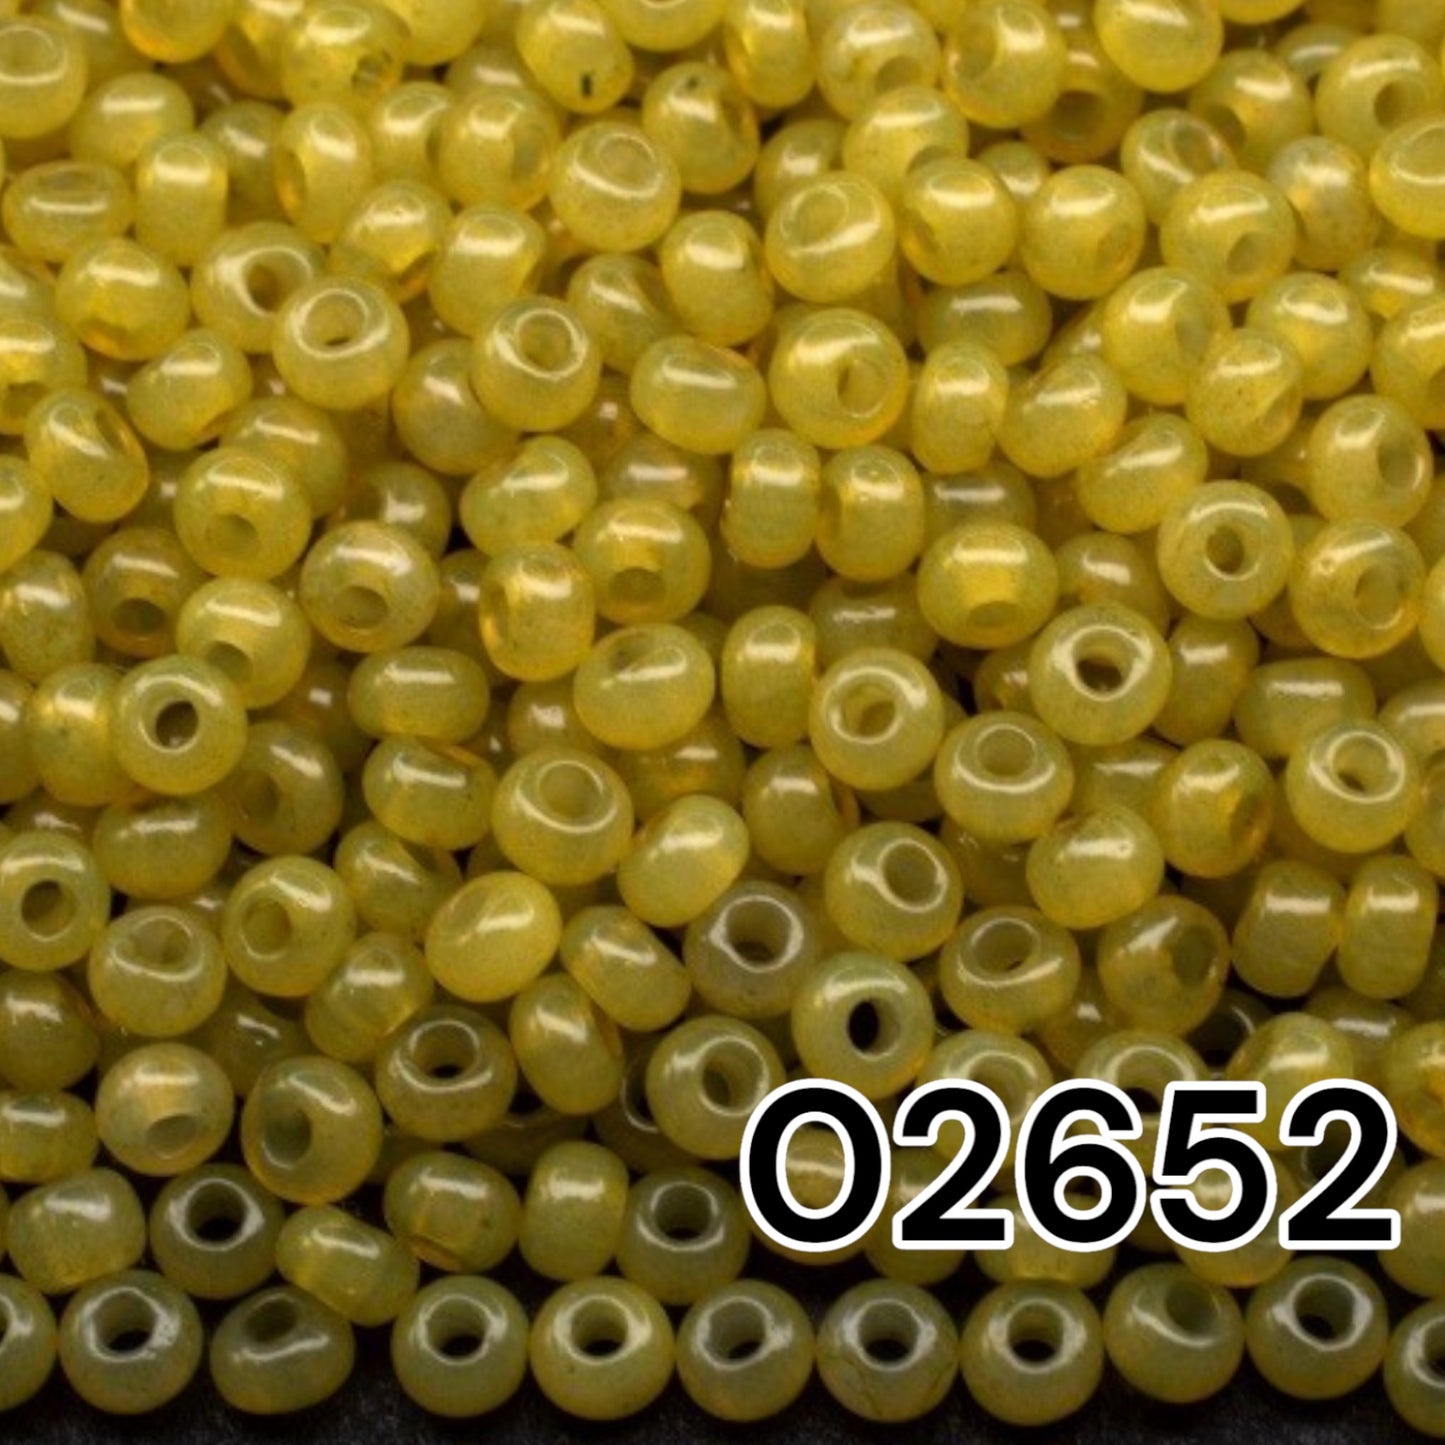 02652 Czech seed beads PRECIOSA round 10/0 olive. Alabaster - Solgel Dyed.